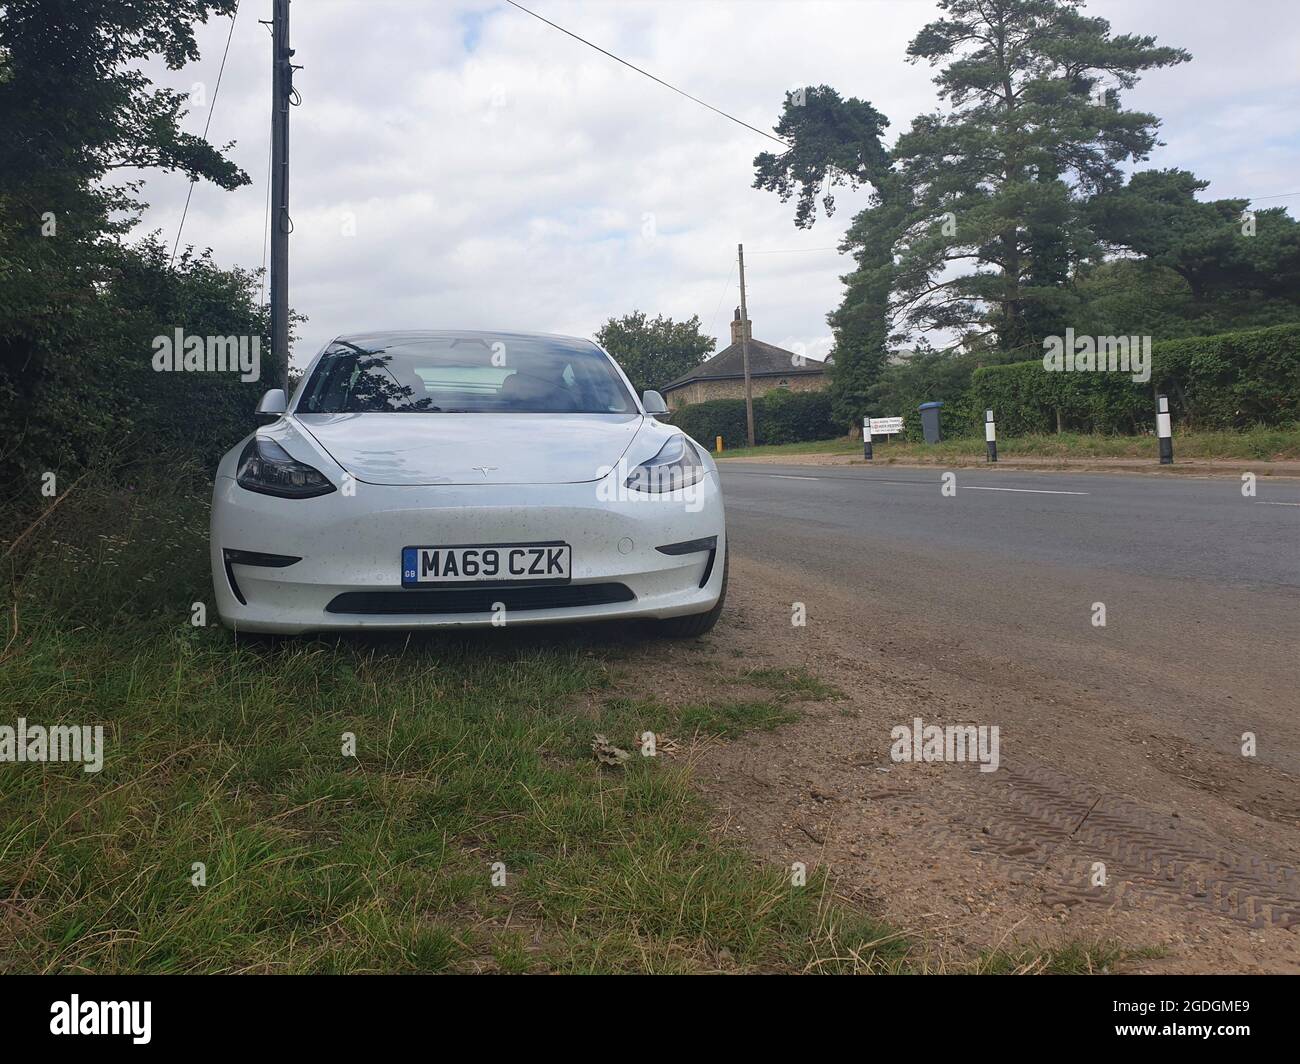 Sutton Suffolk UK August 12 2021: A 2019 model Tesla Model 3 Long-Range Dual Motor AWD electric vehicle parked in a small countryside village in Suffo Stock Photo